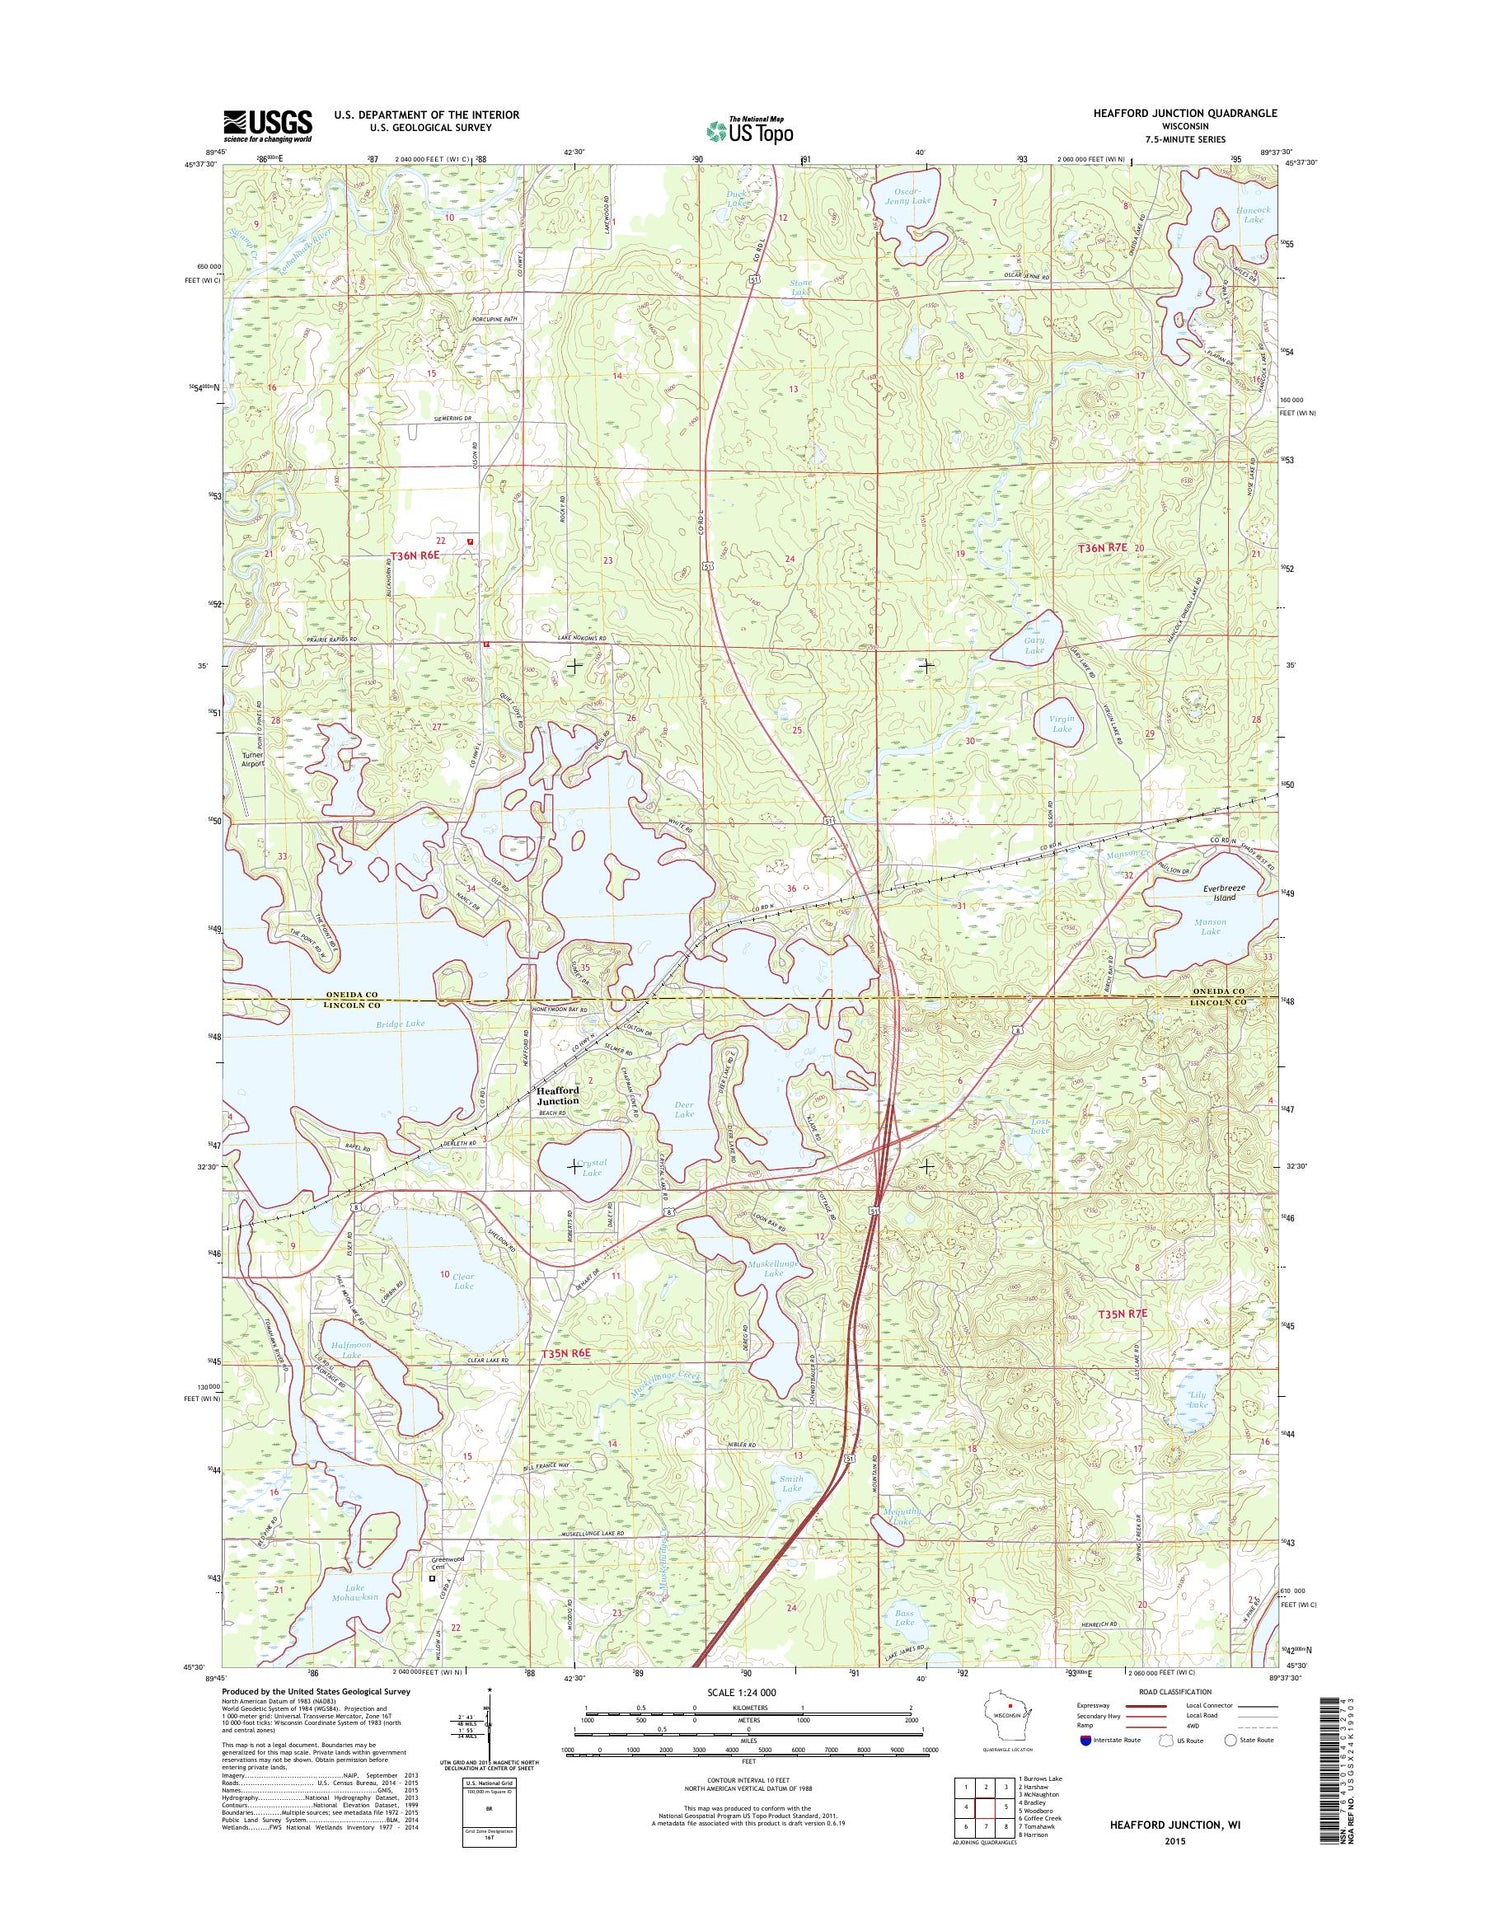 Heafford Junction Wisconsin US Topo Map Image